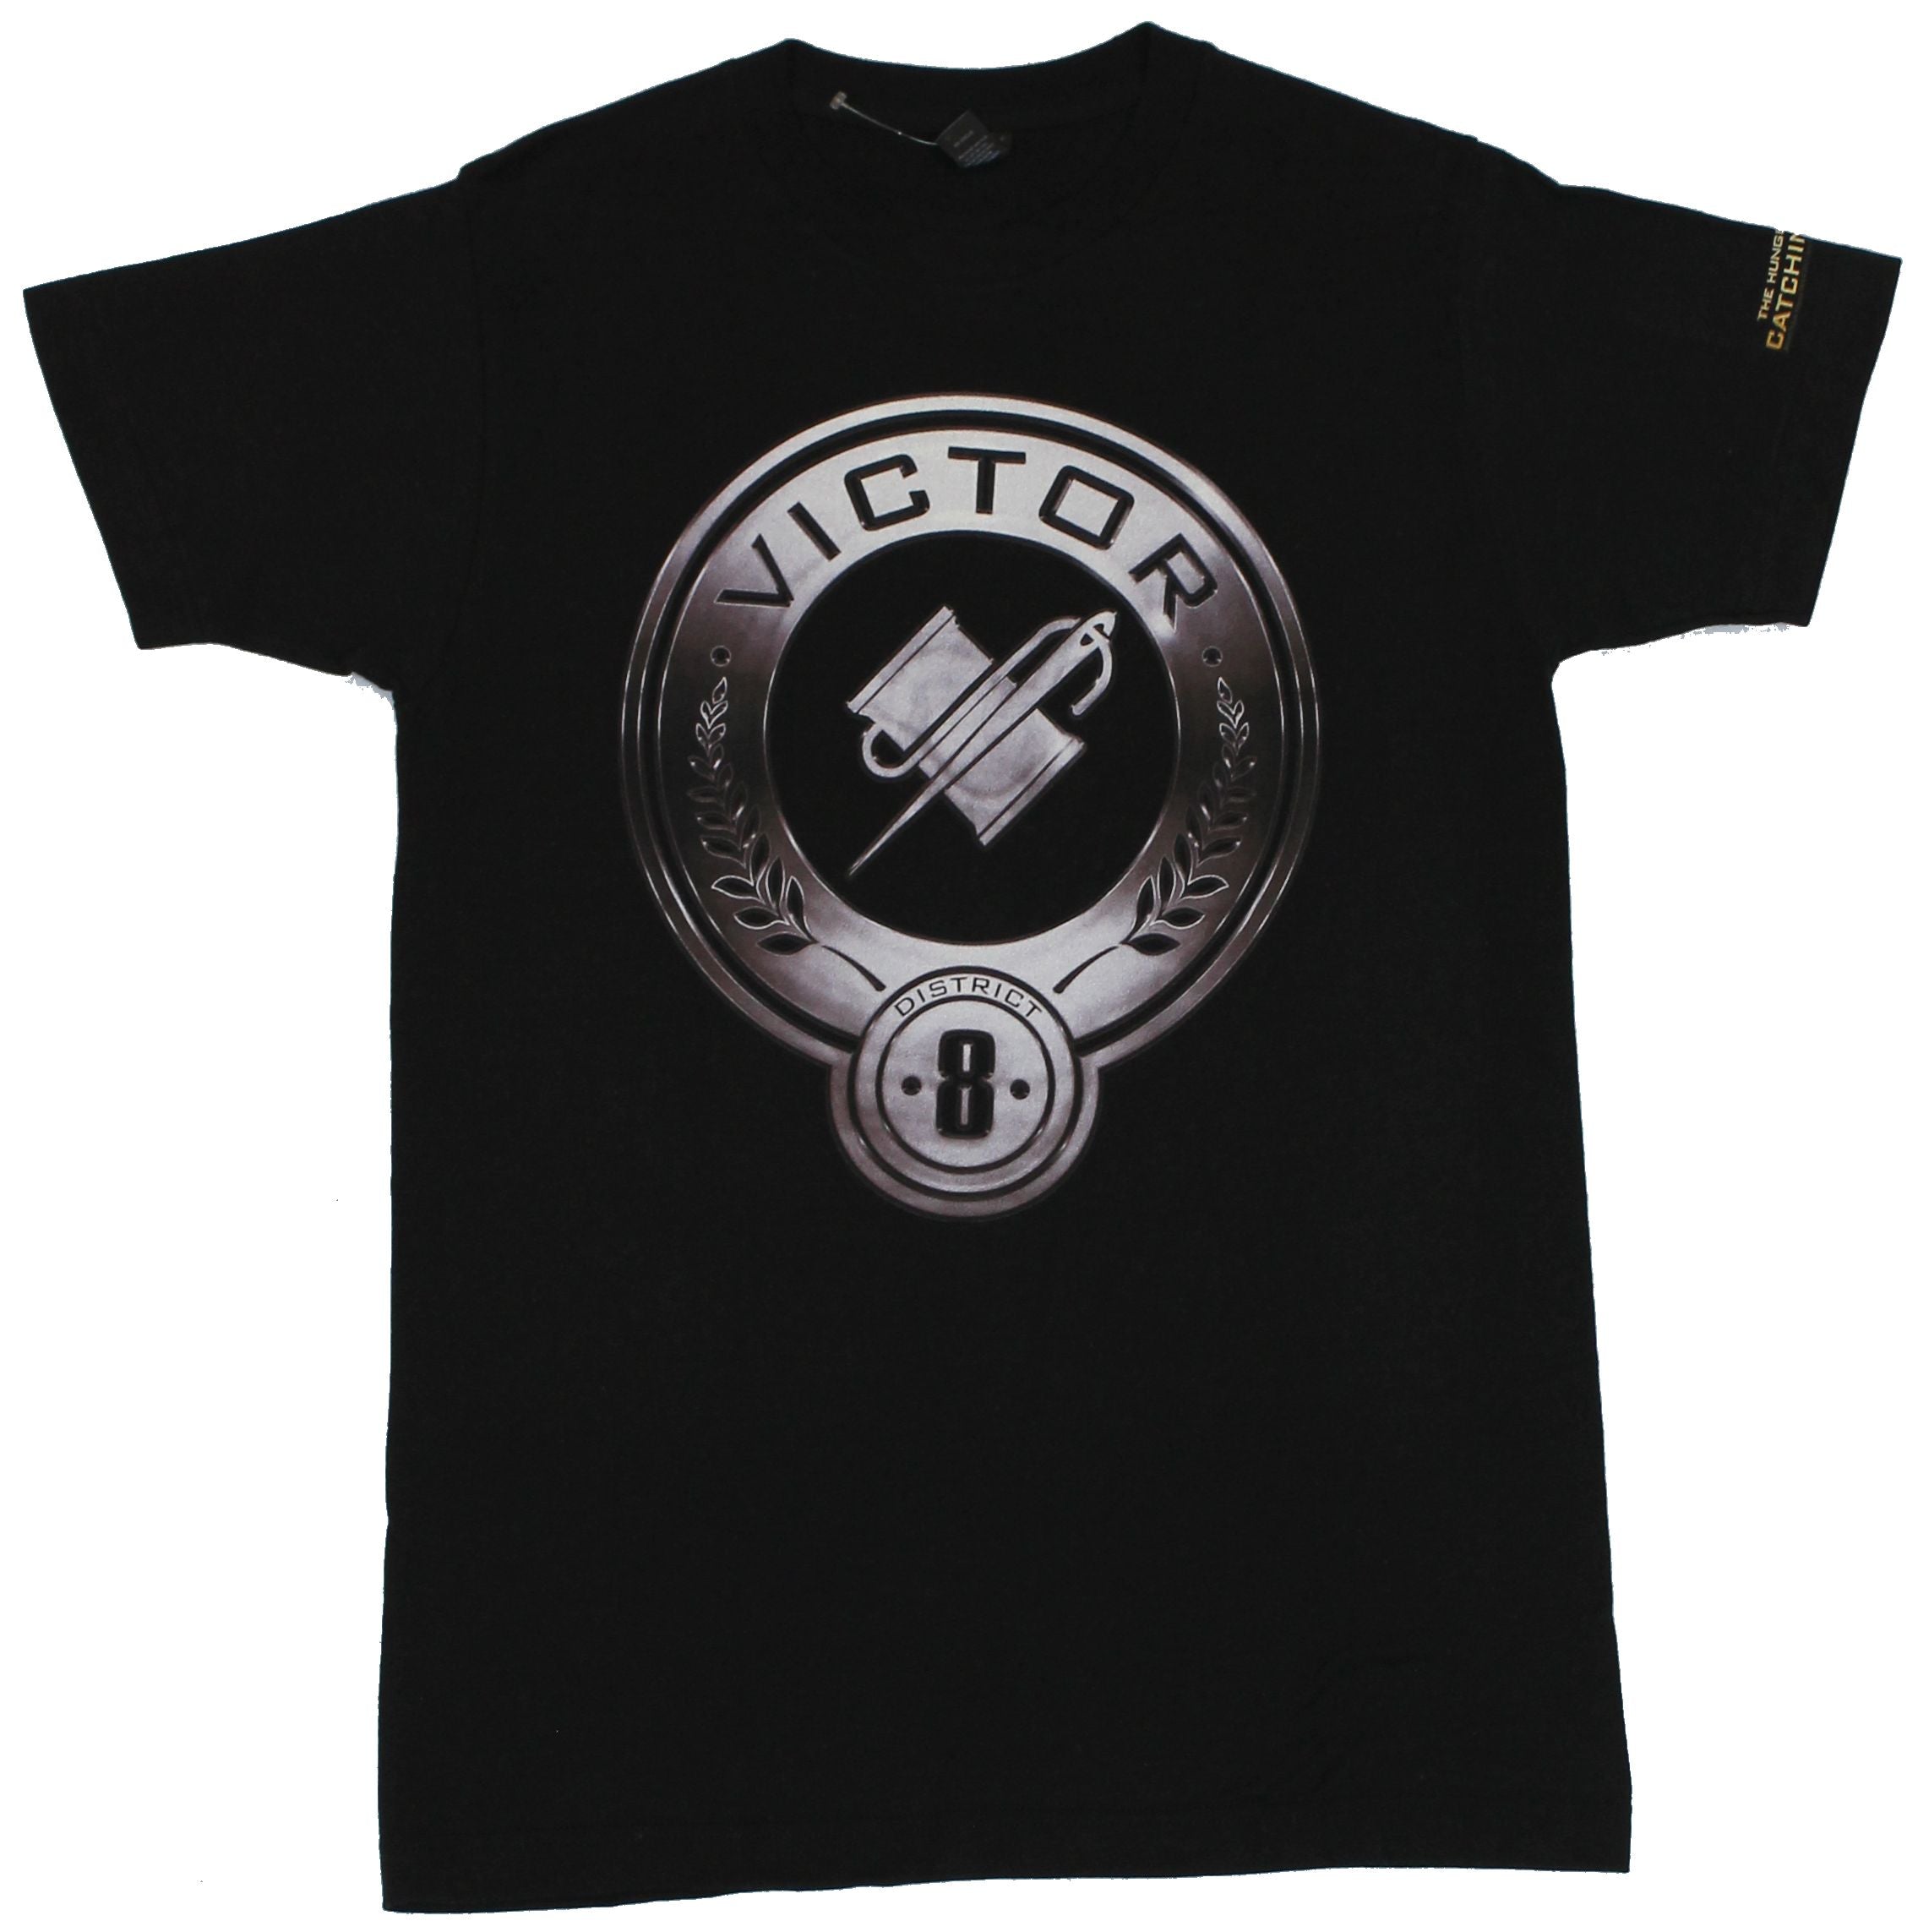 The Hunger Games Mens T-Shirt - District 8 Thread and Needle Image